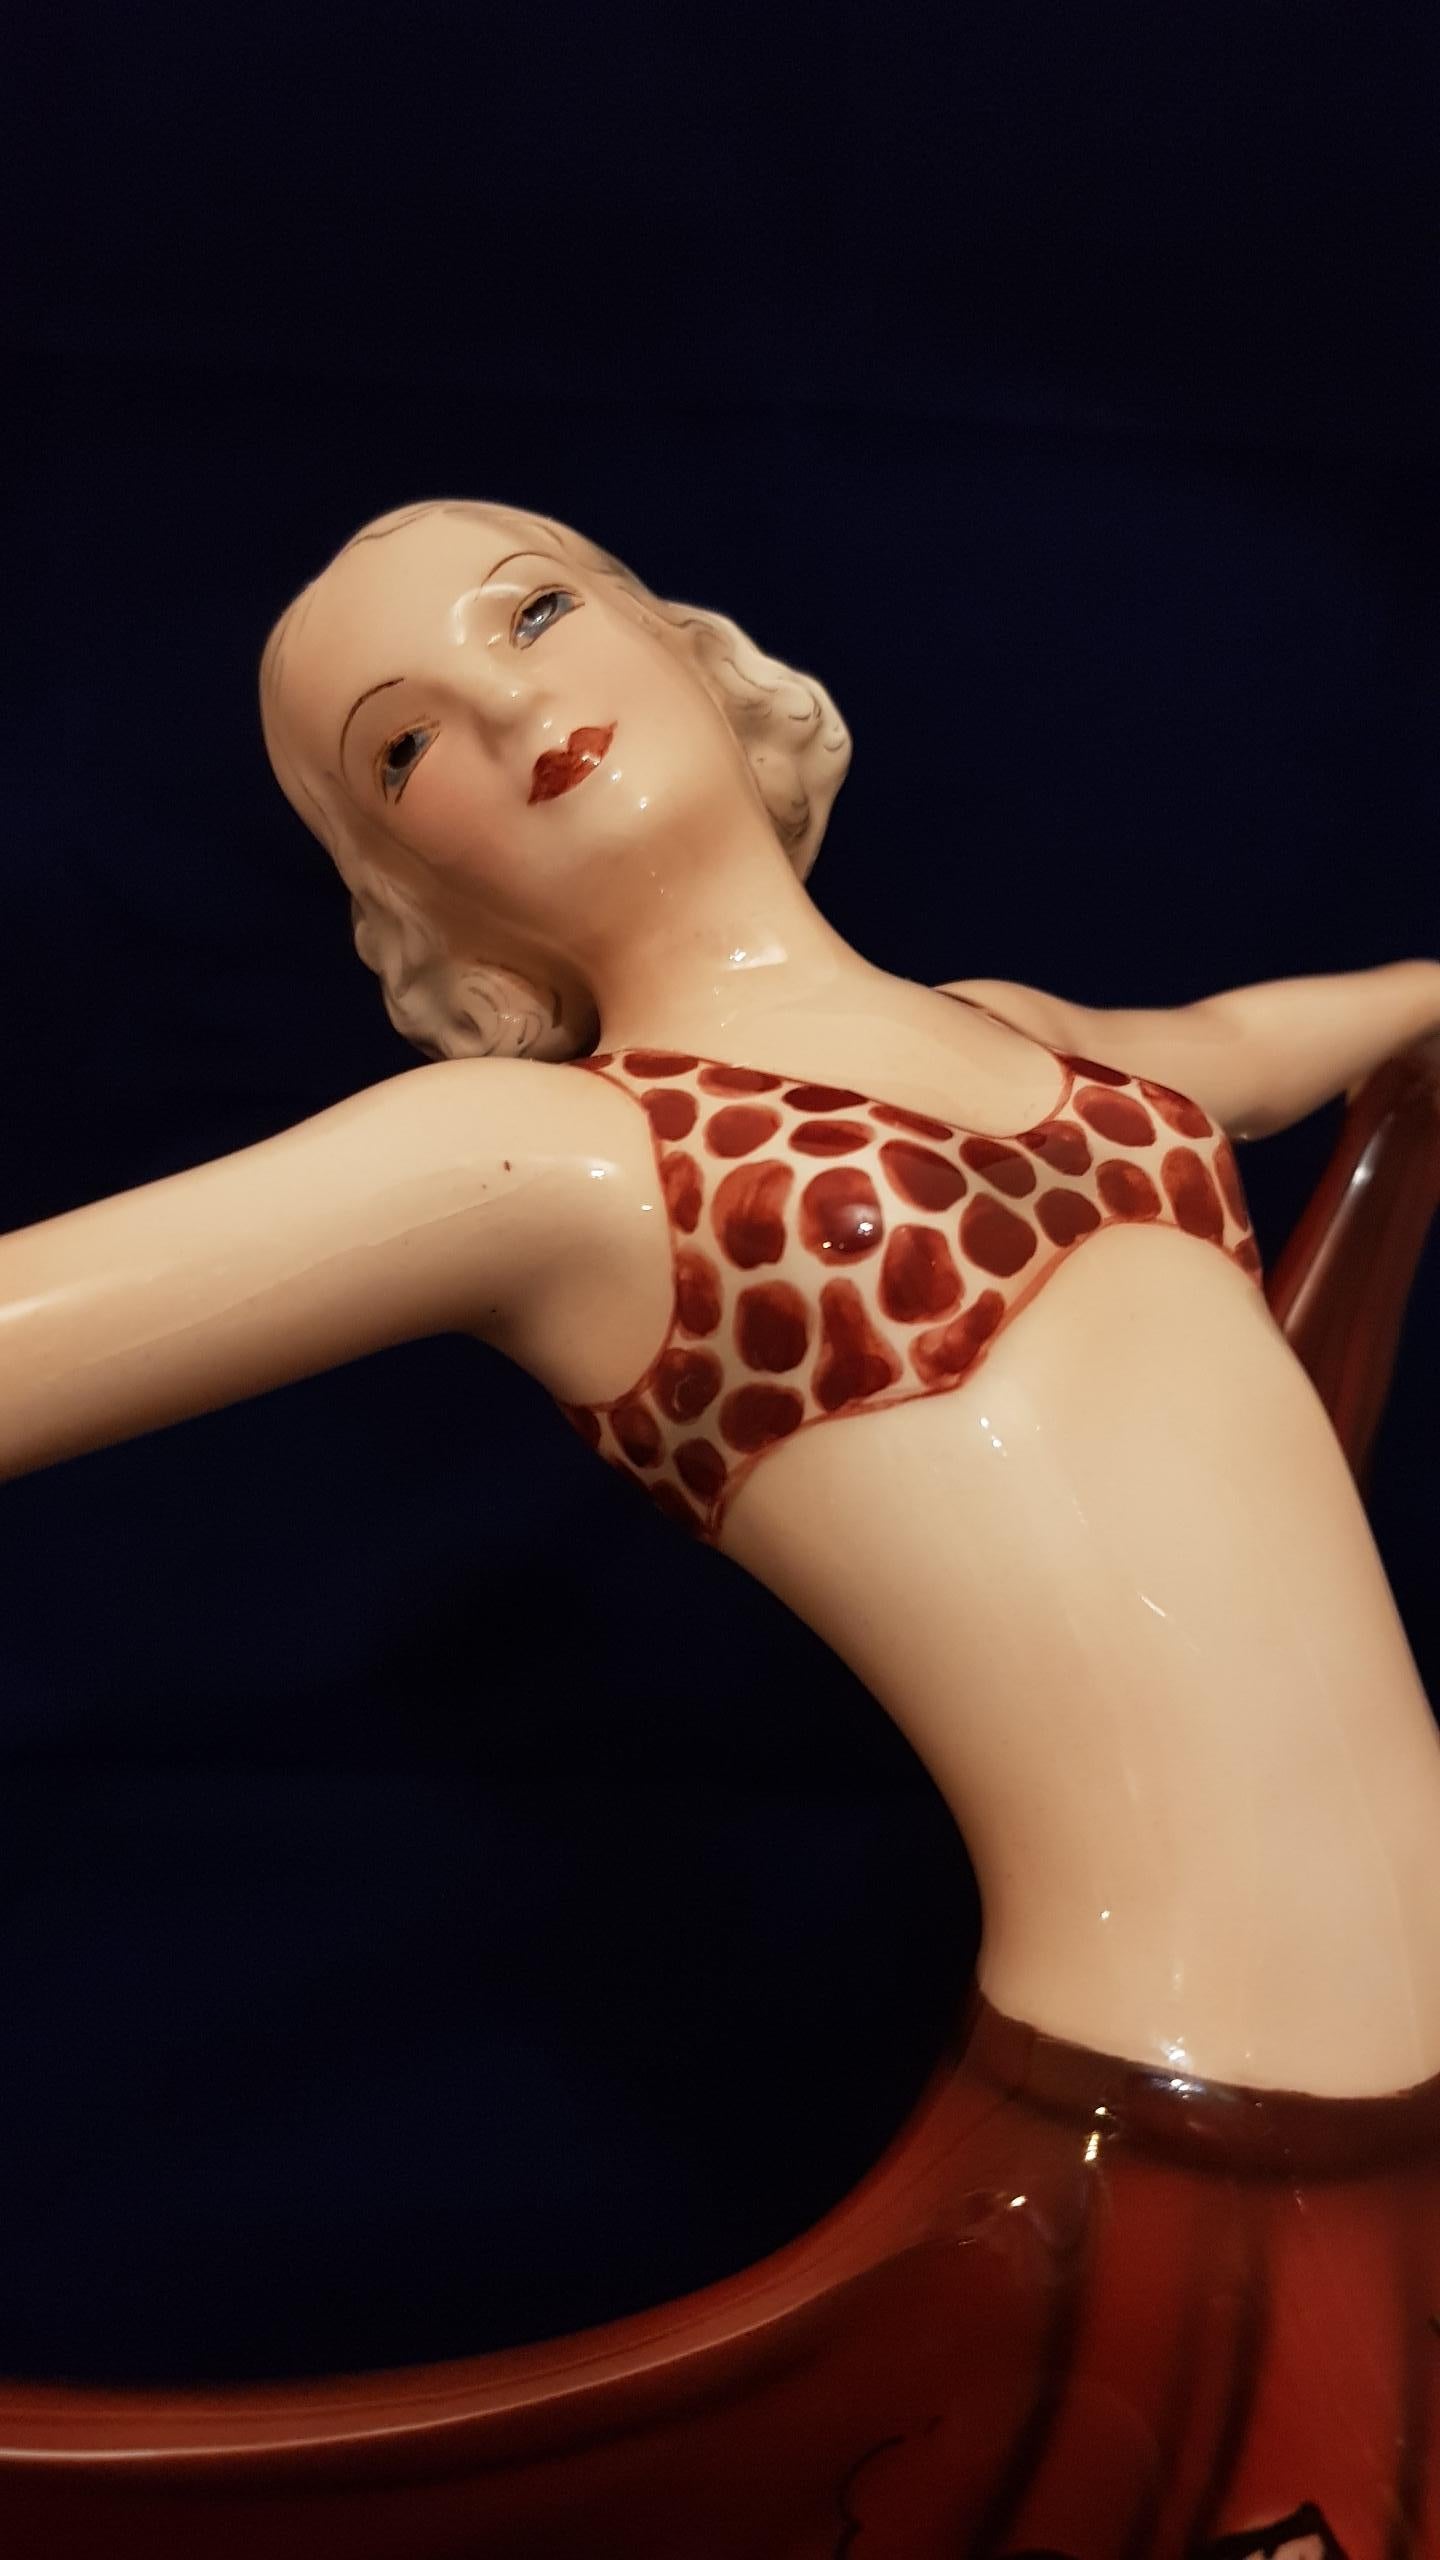 Goldscheider 1936 Lorenzl Josef: ceramic dancer with a bikini separated from the butterfly skirt with floral pattern.
Marked under the base and numbered 758220210, H 36 cm approximately
Published: Robert E. Dechant / Filipp Goldscheider